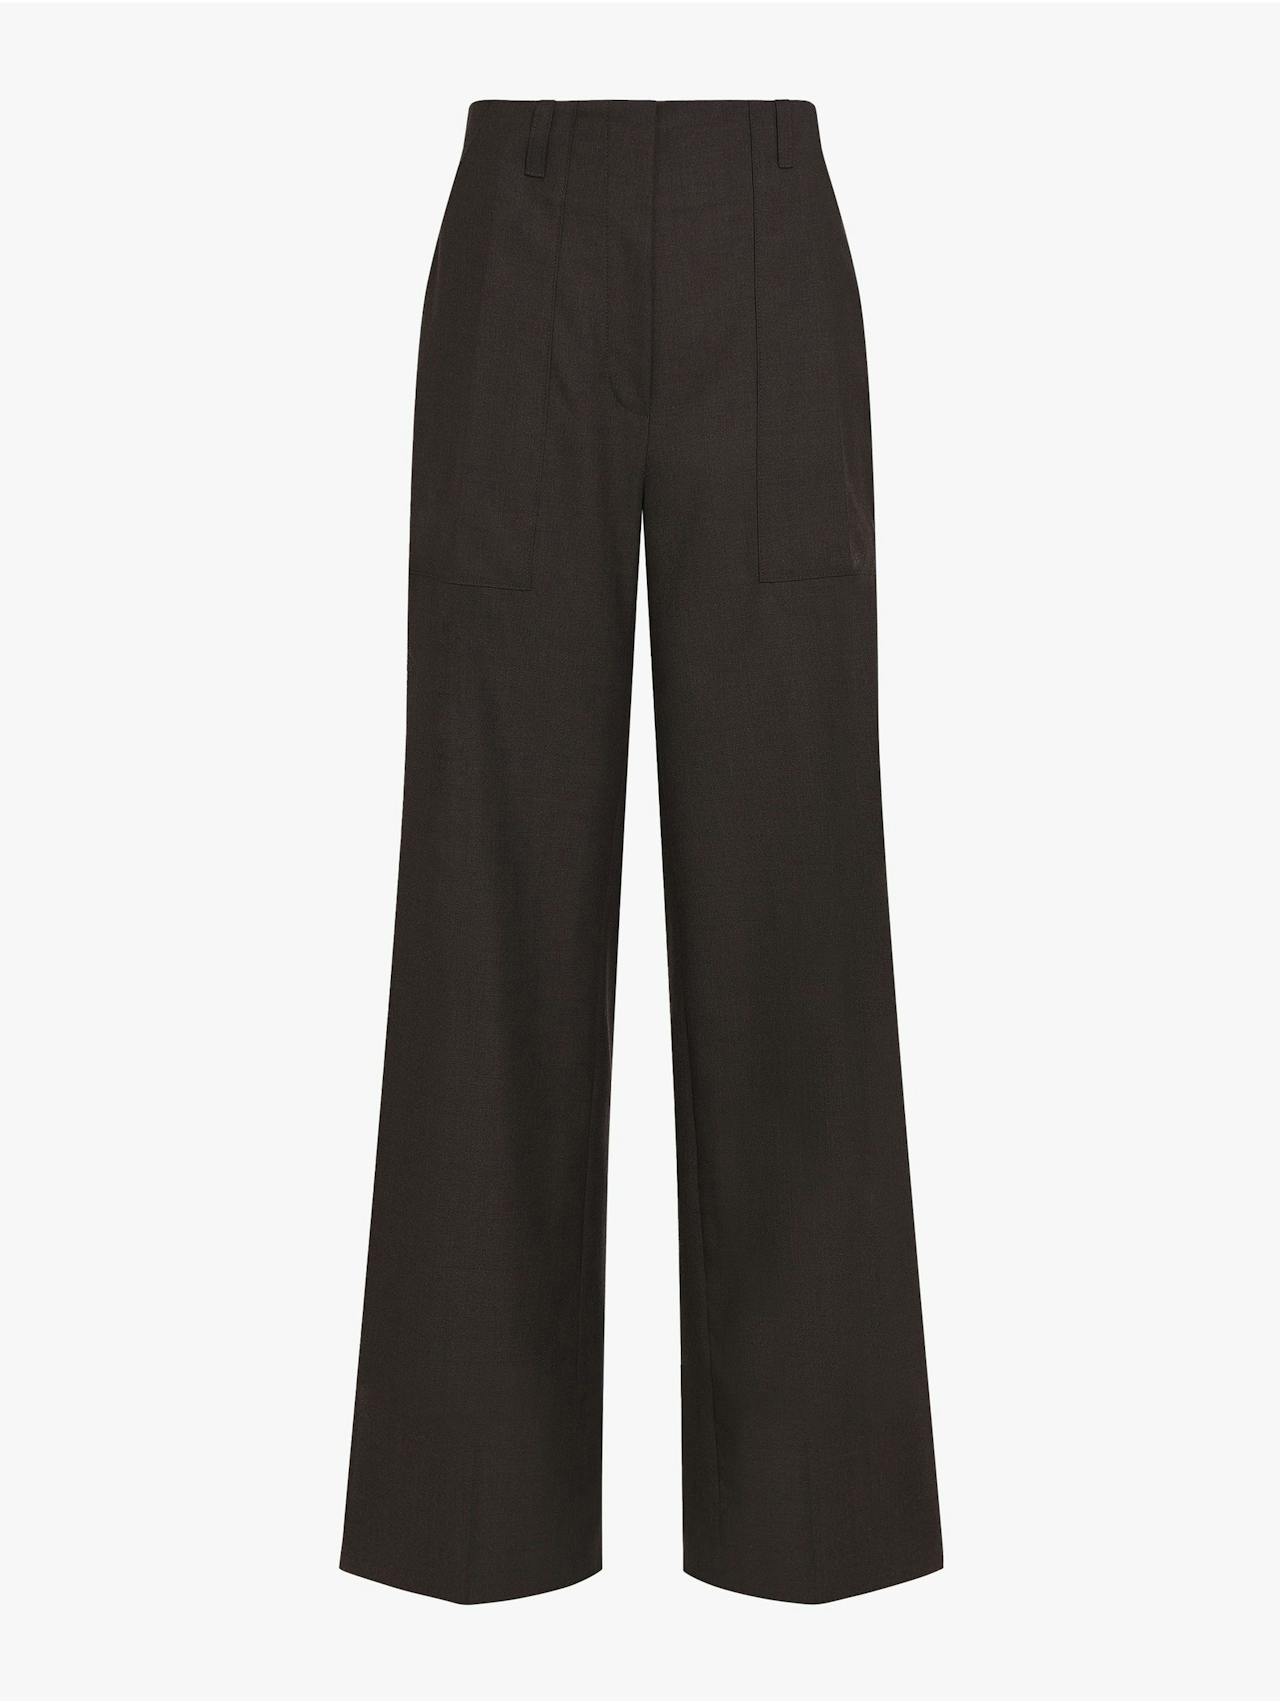 Brown wool Ruth trousers